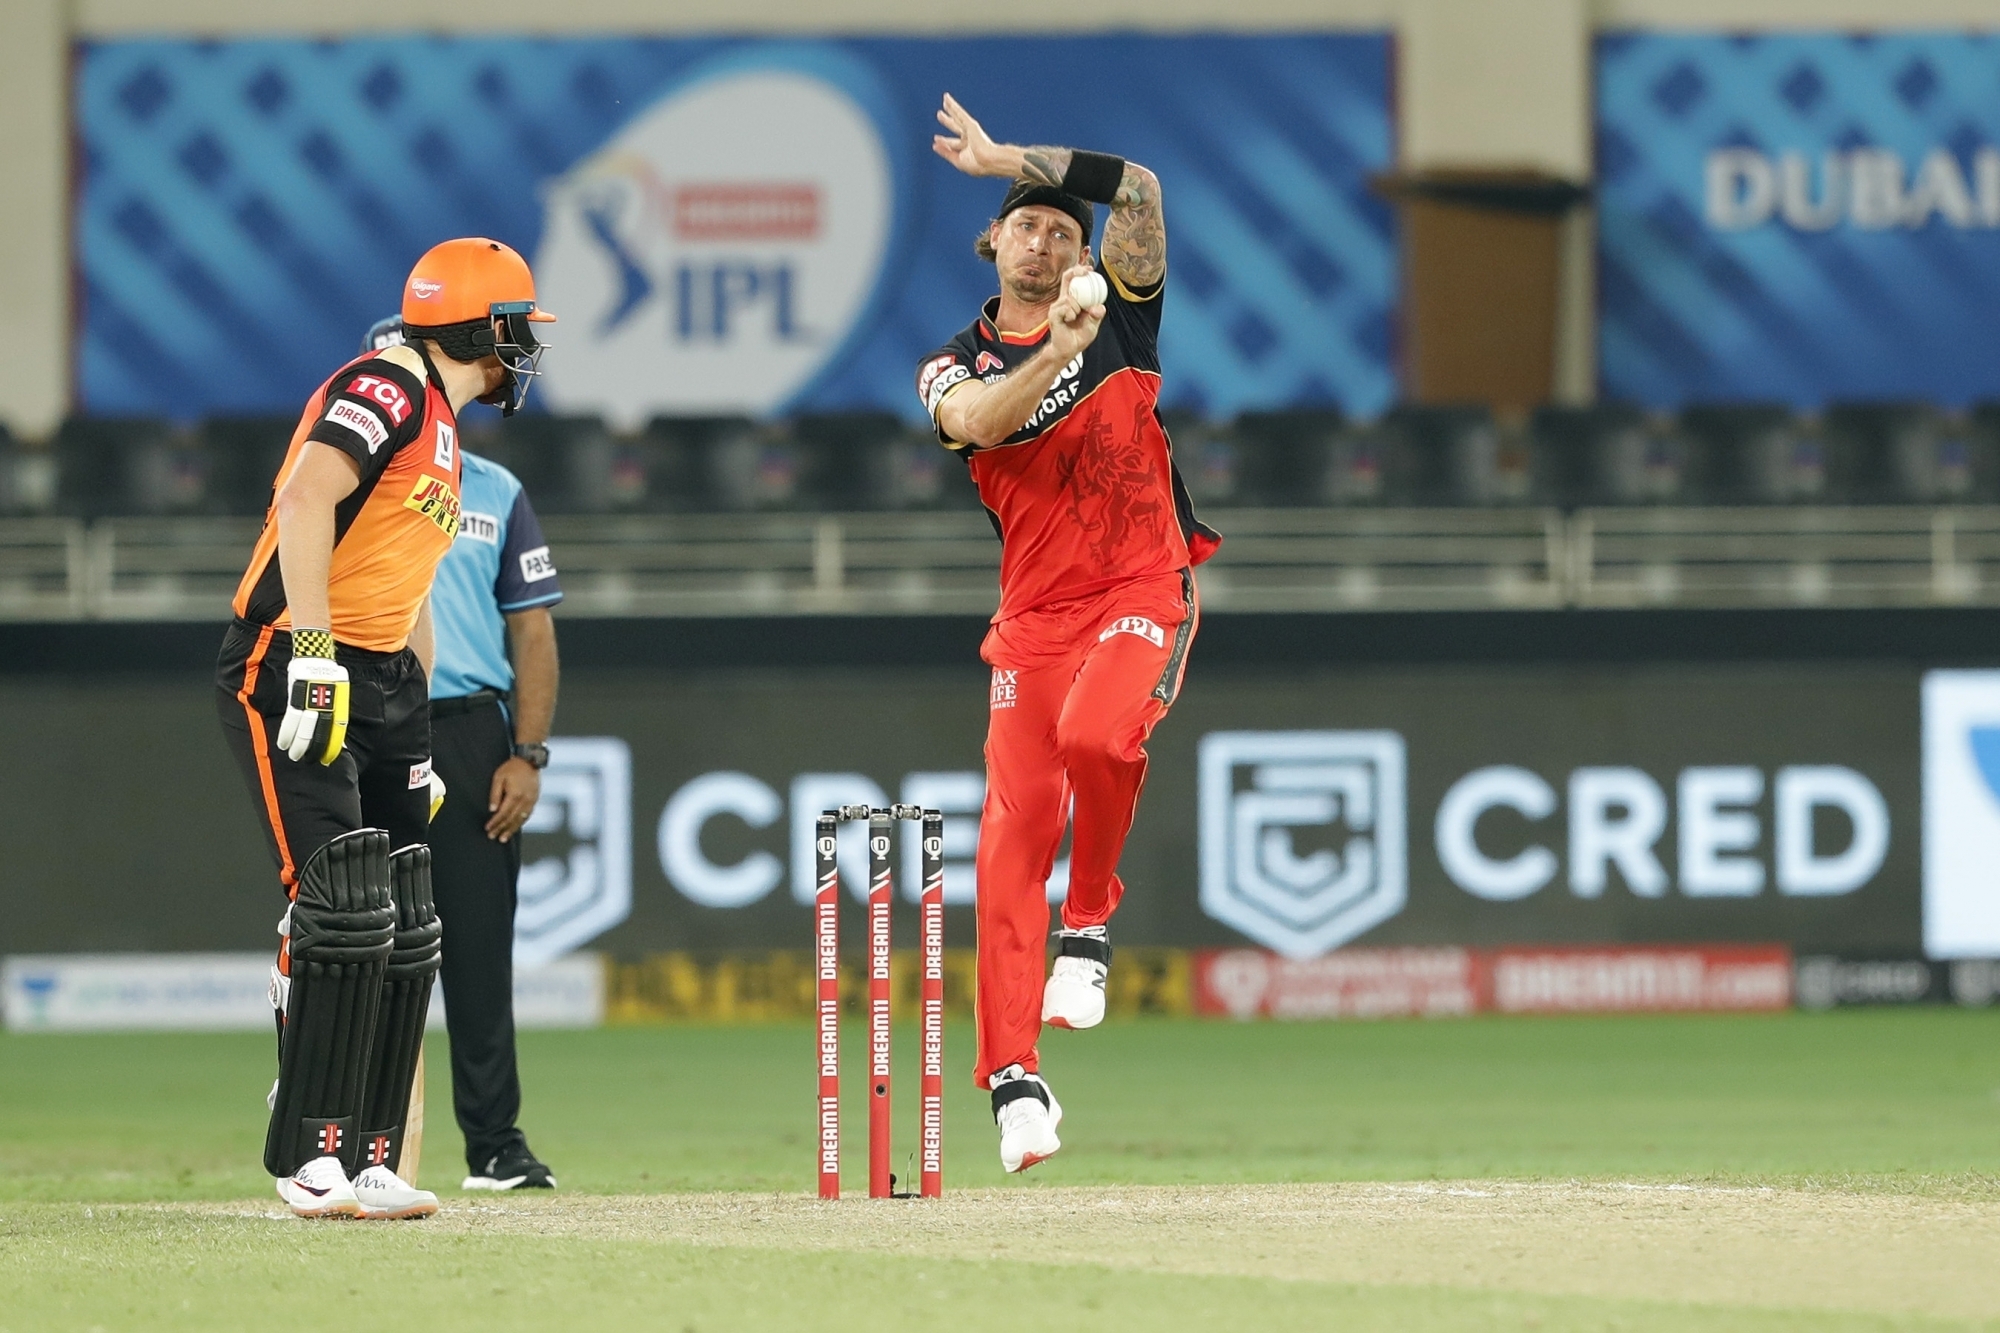 Dale Steyn had seen better days in IPL than his outings in IPL 13 edition | BCCI/IPL